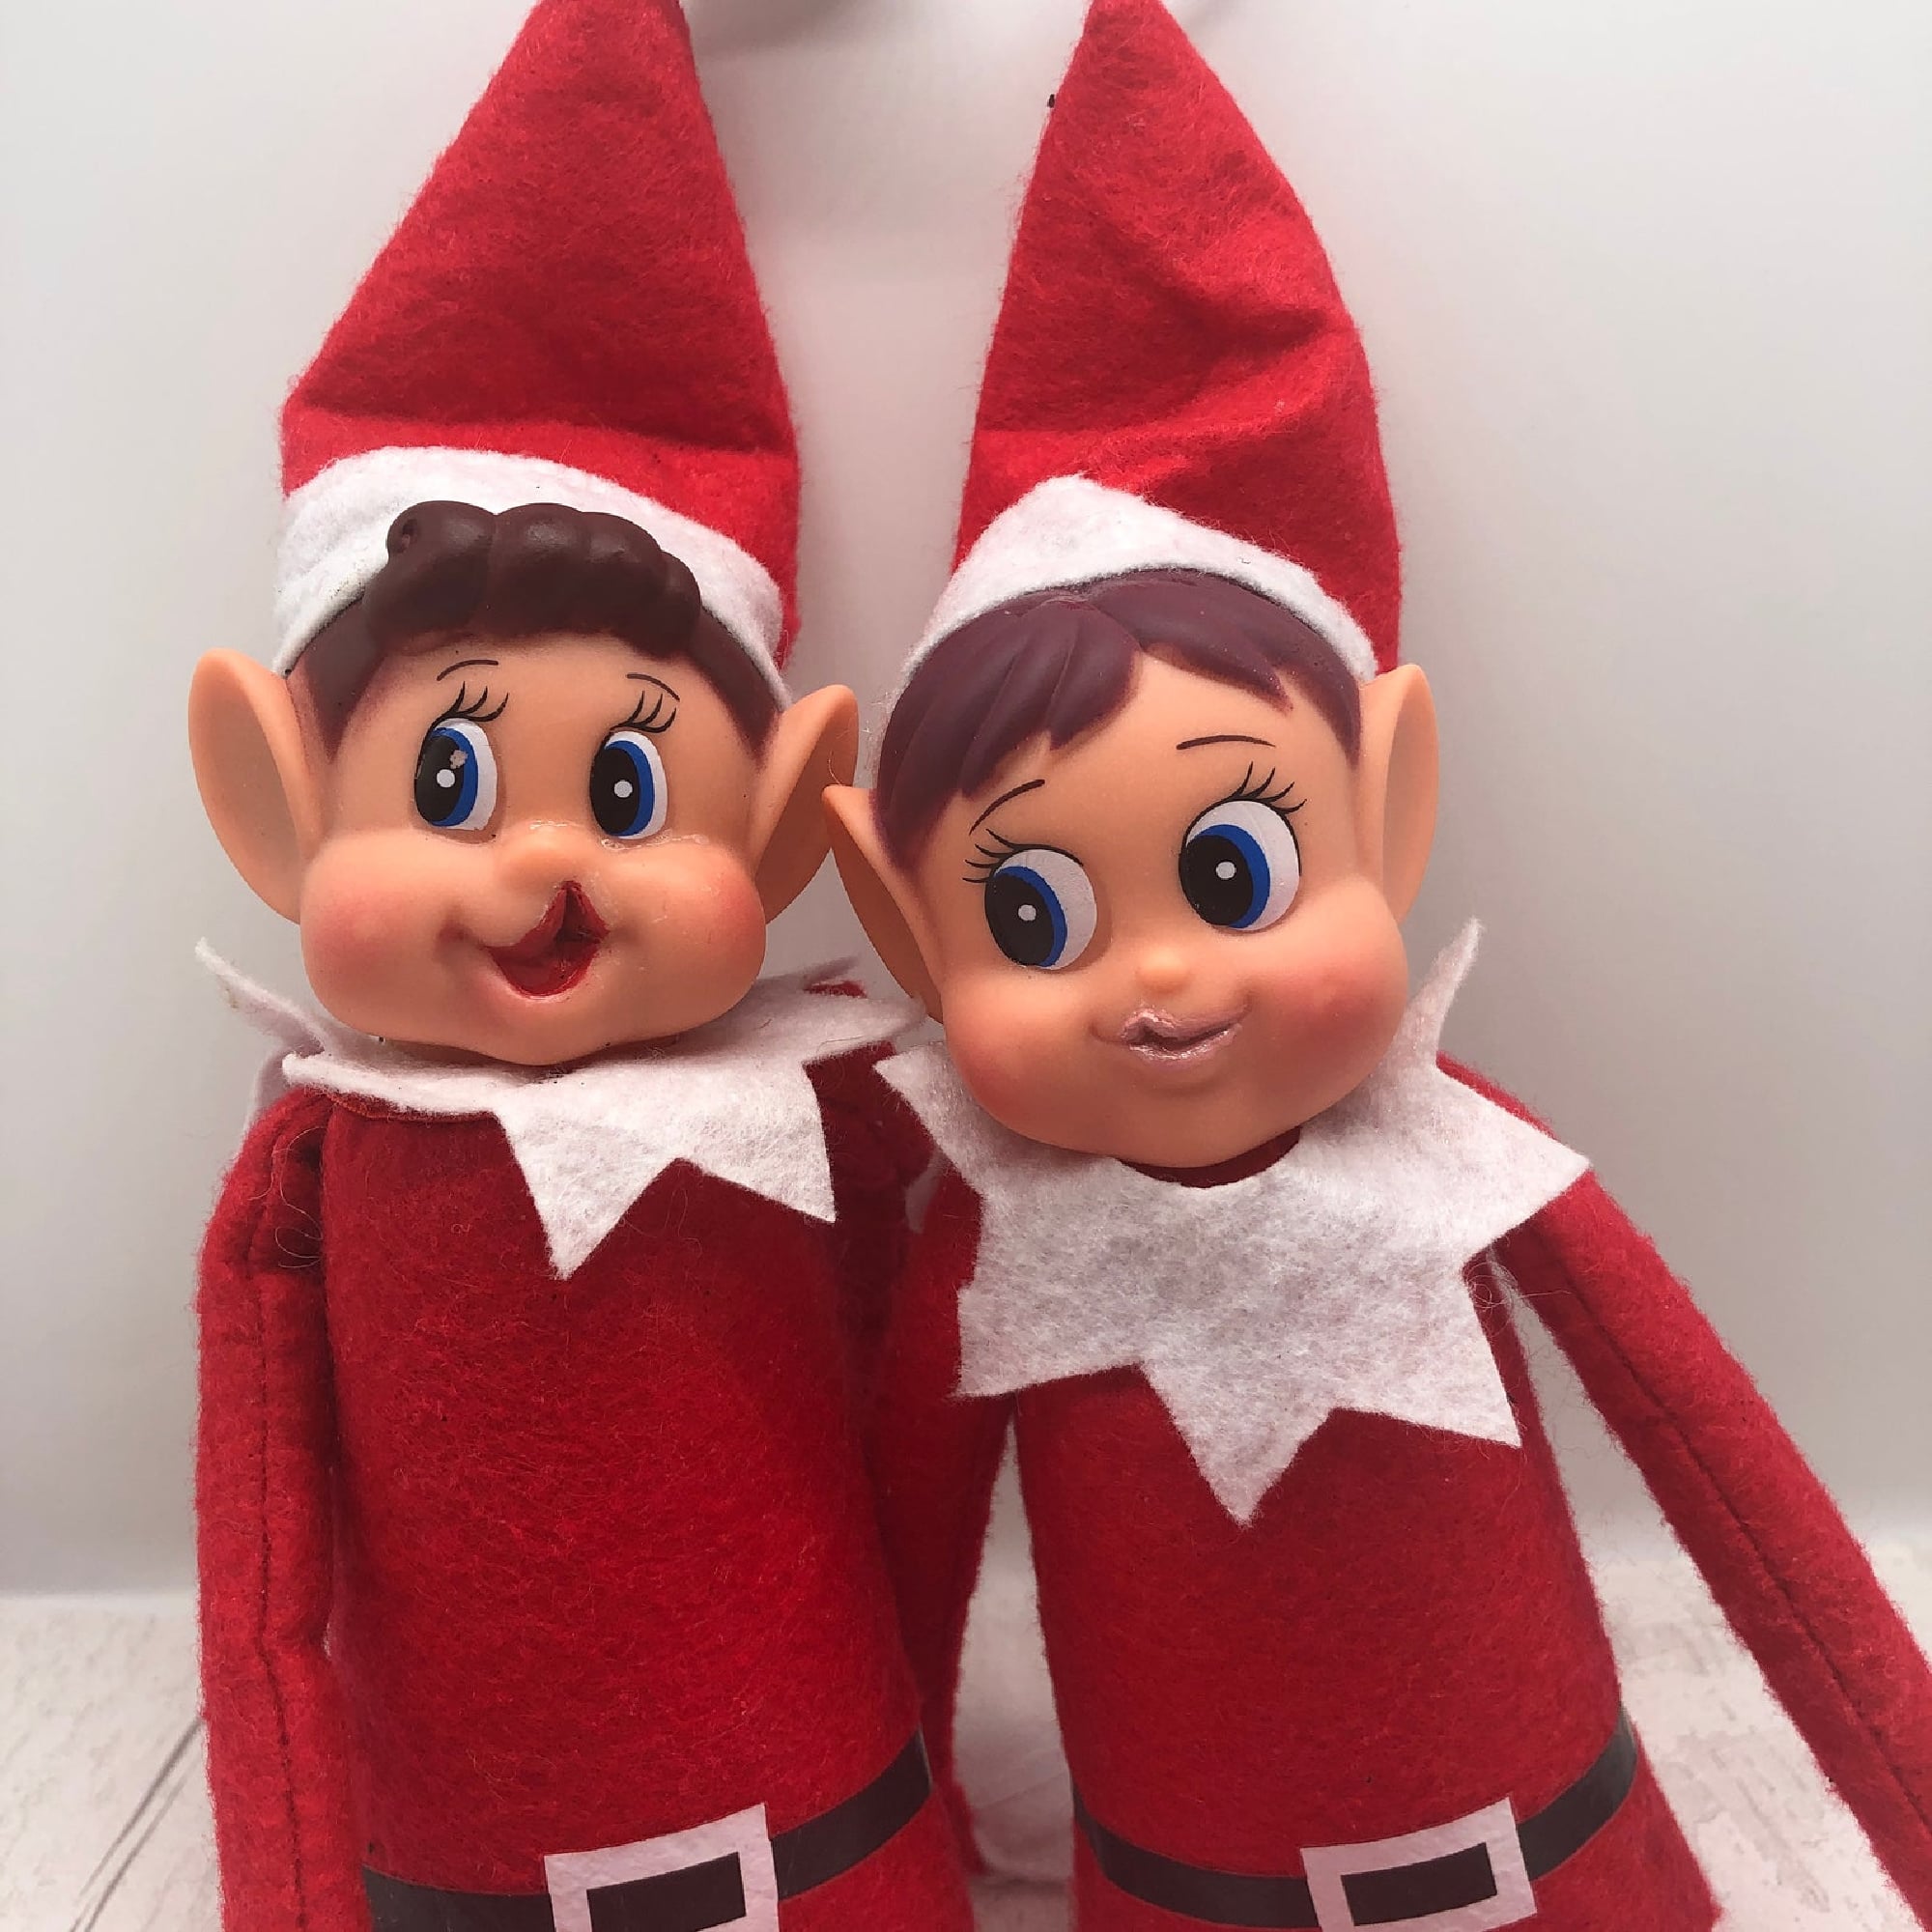 Modified Christmas Elf Dolls For Kids With Disabilities Popsugar Family